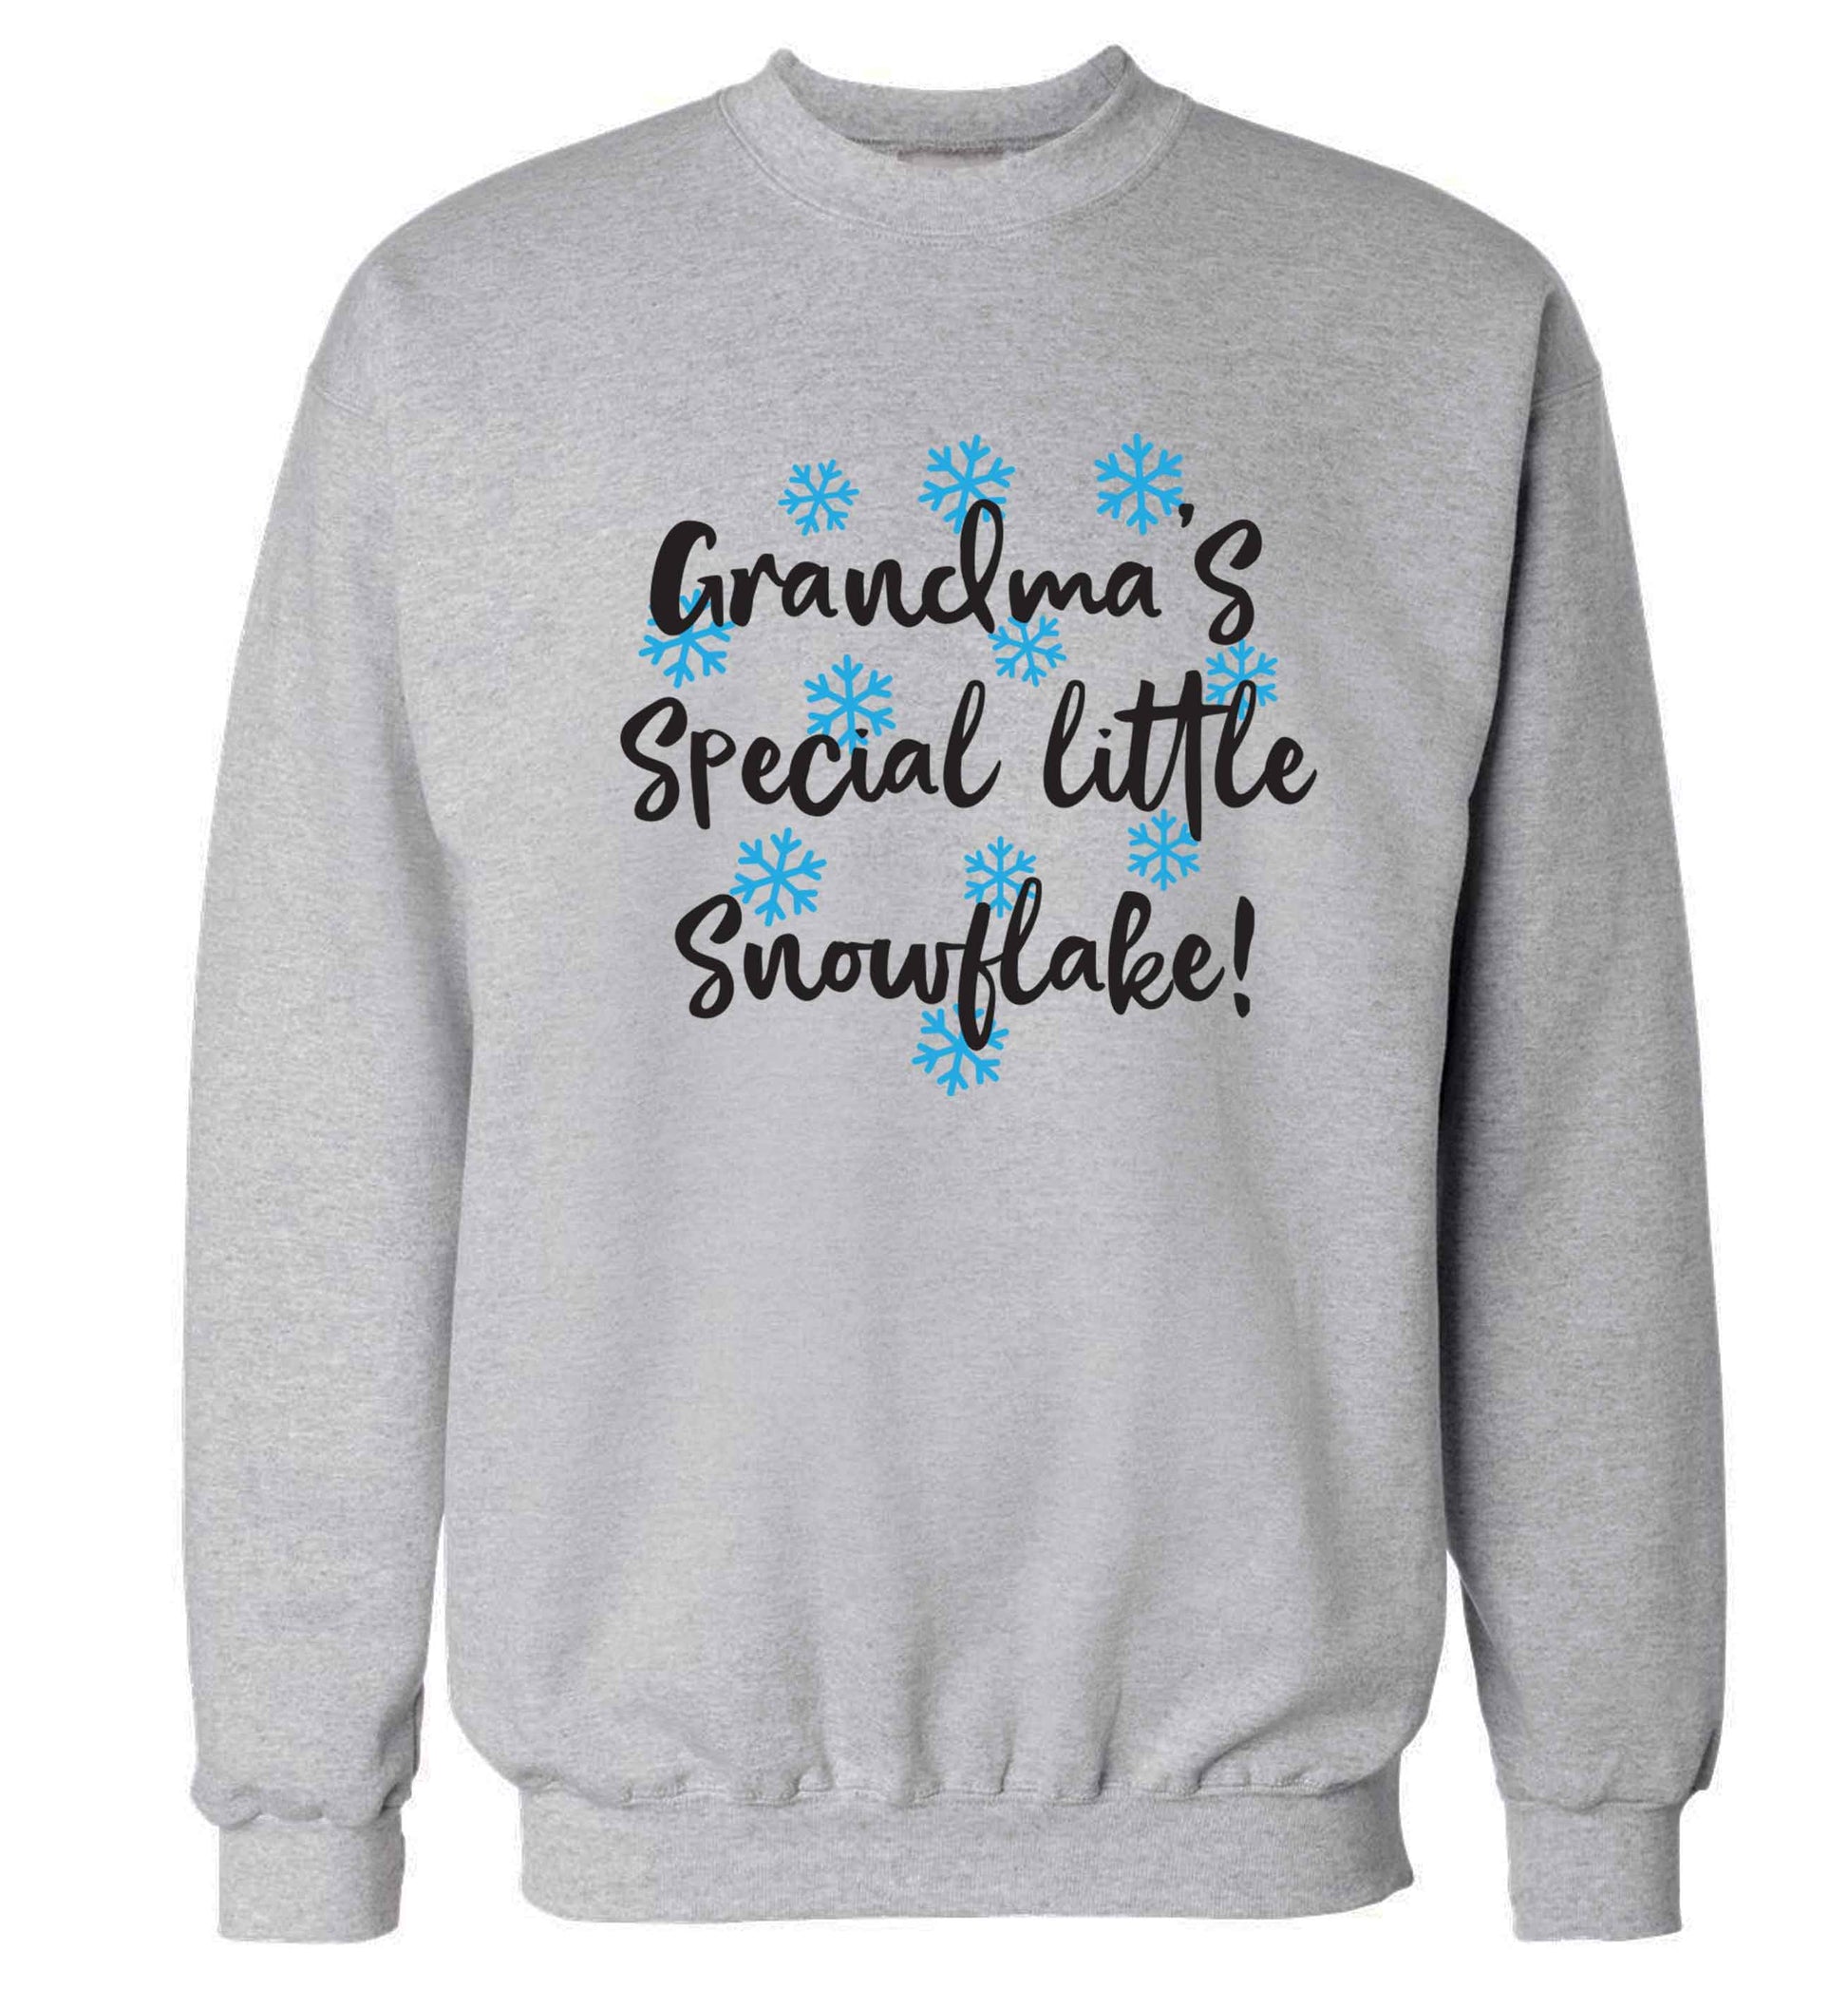 Grandma's special little snowflake Adult's unisex grey Sweater 2XL